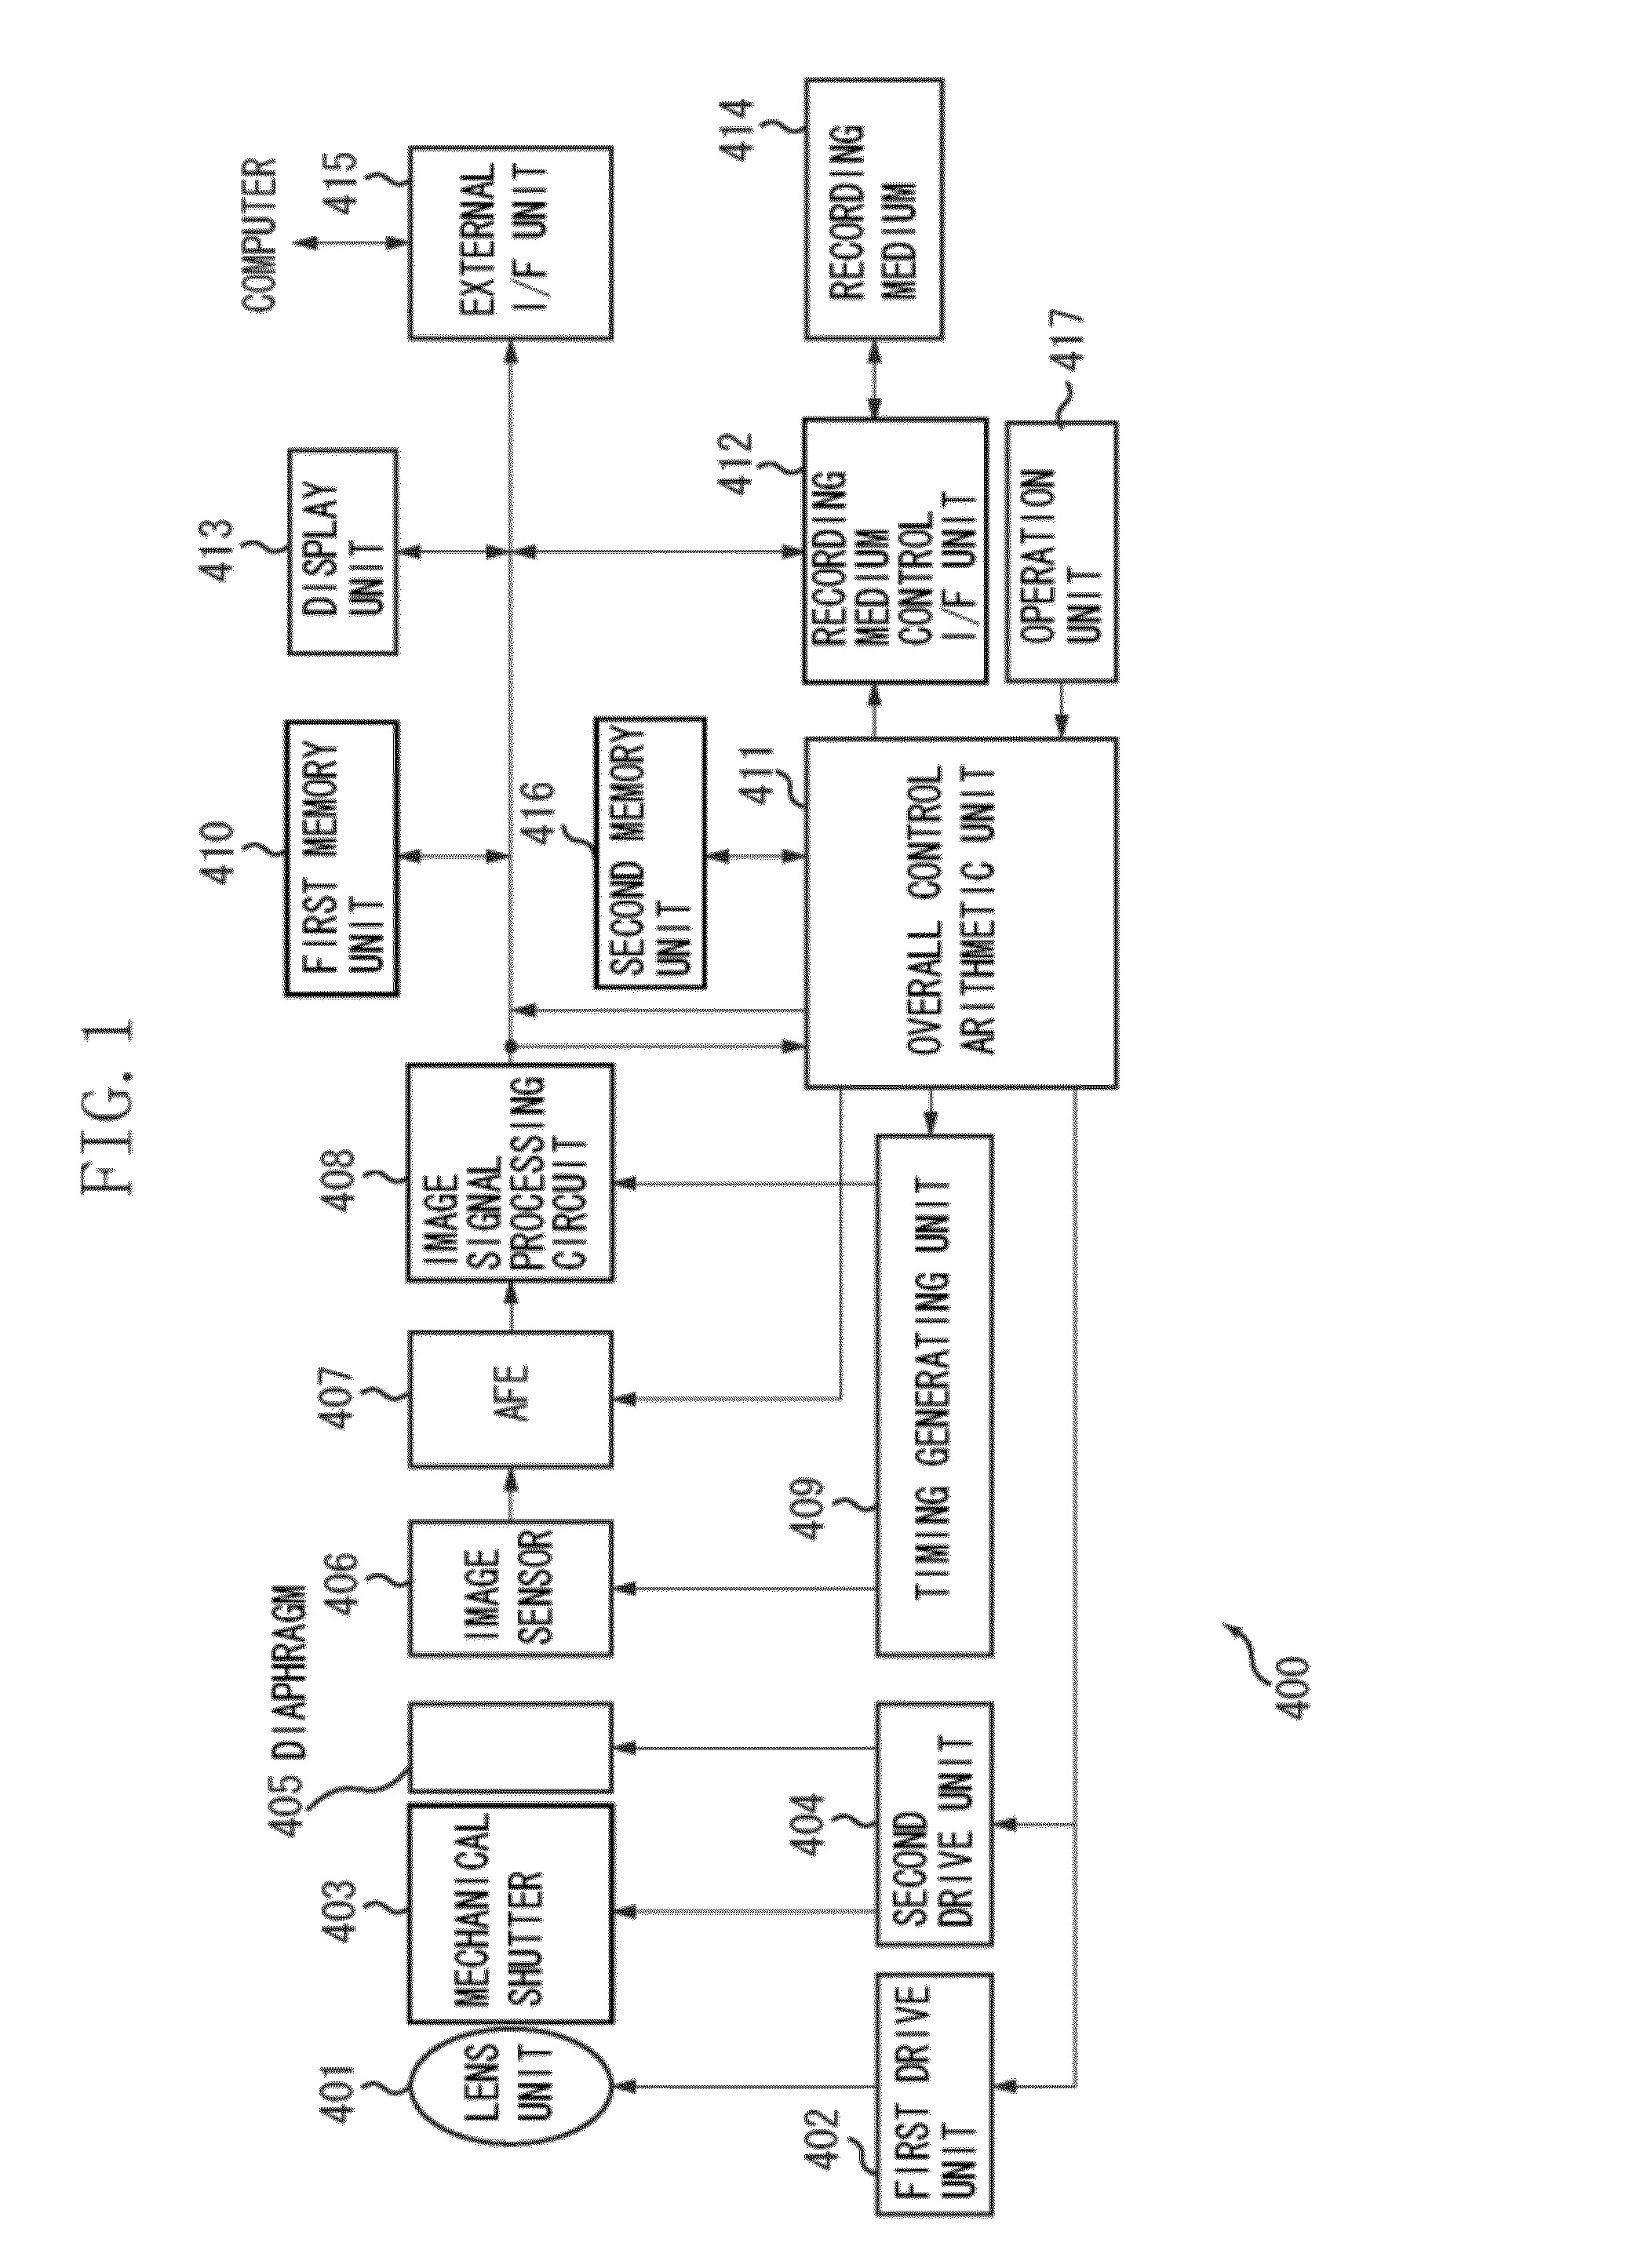 Image sensing apparatus and control method for the image sensing apparatus